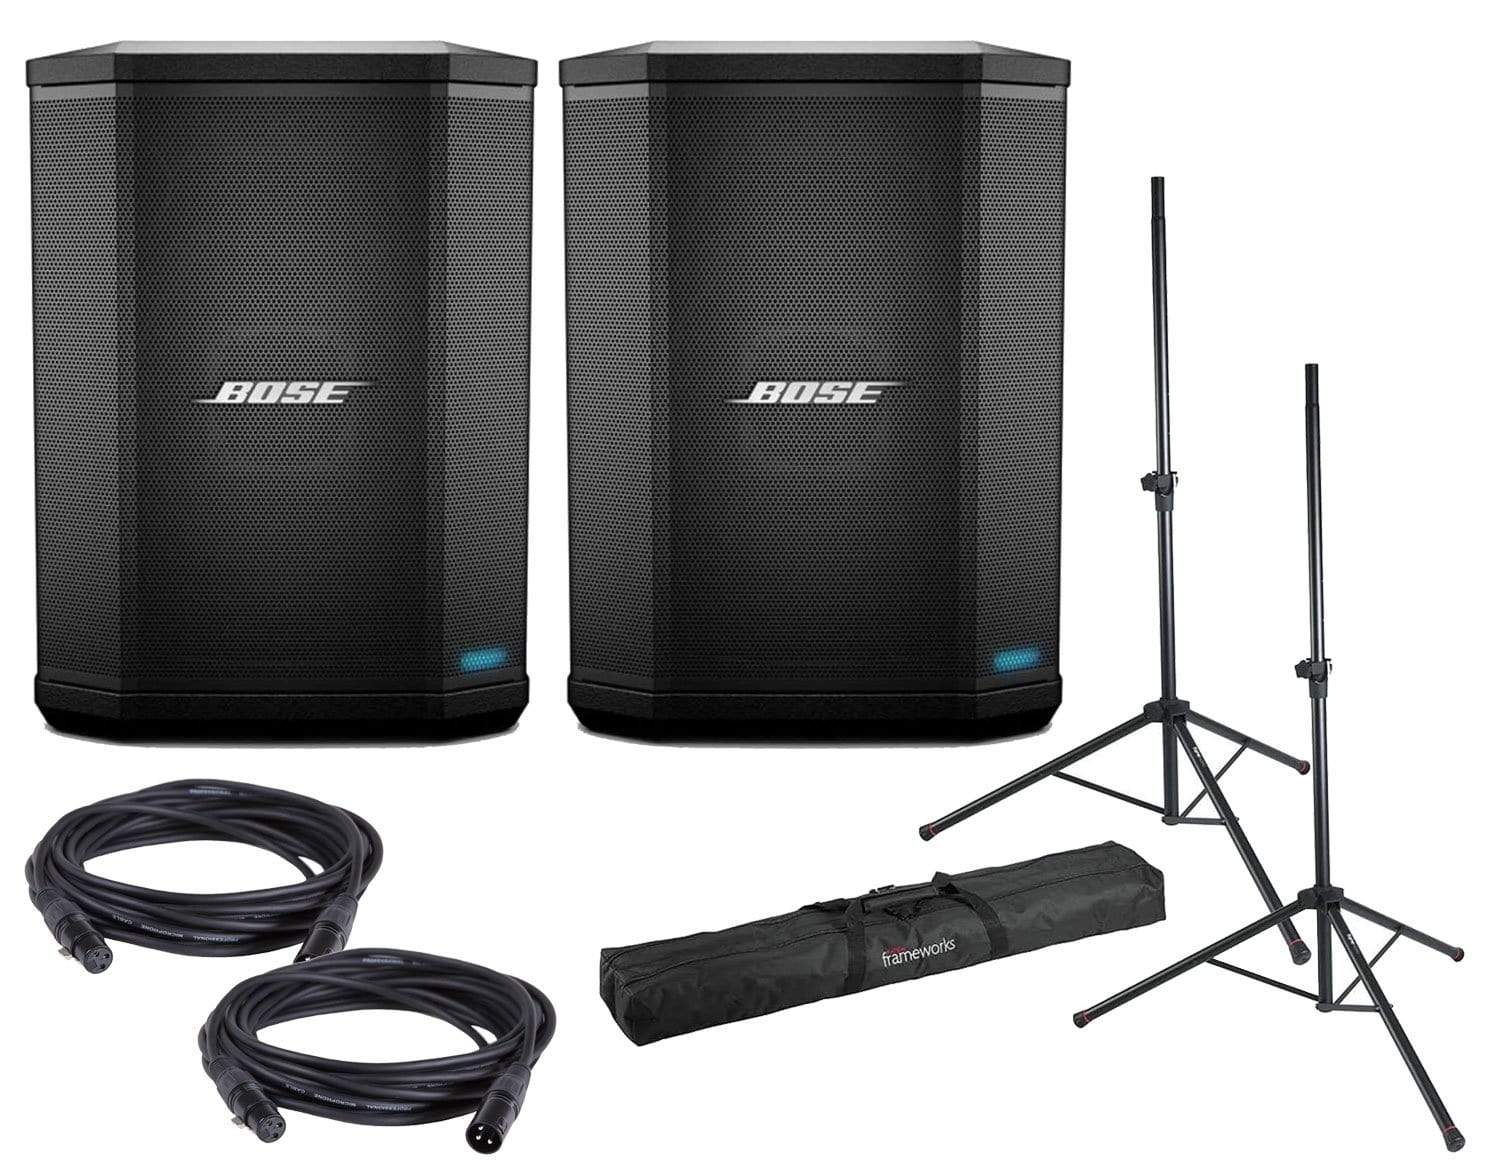 Bose S1 Pro Multi-Position PA System Pair with Stands